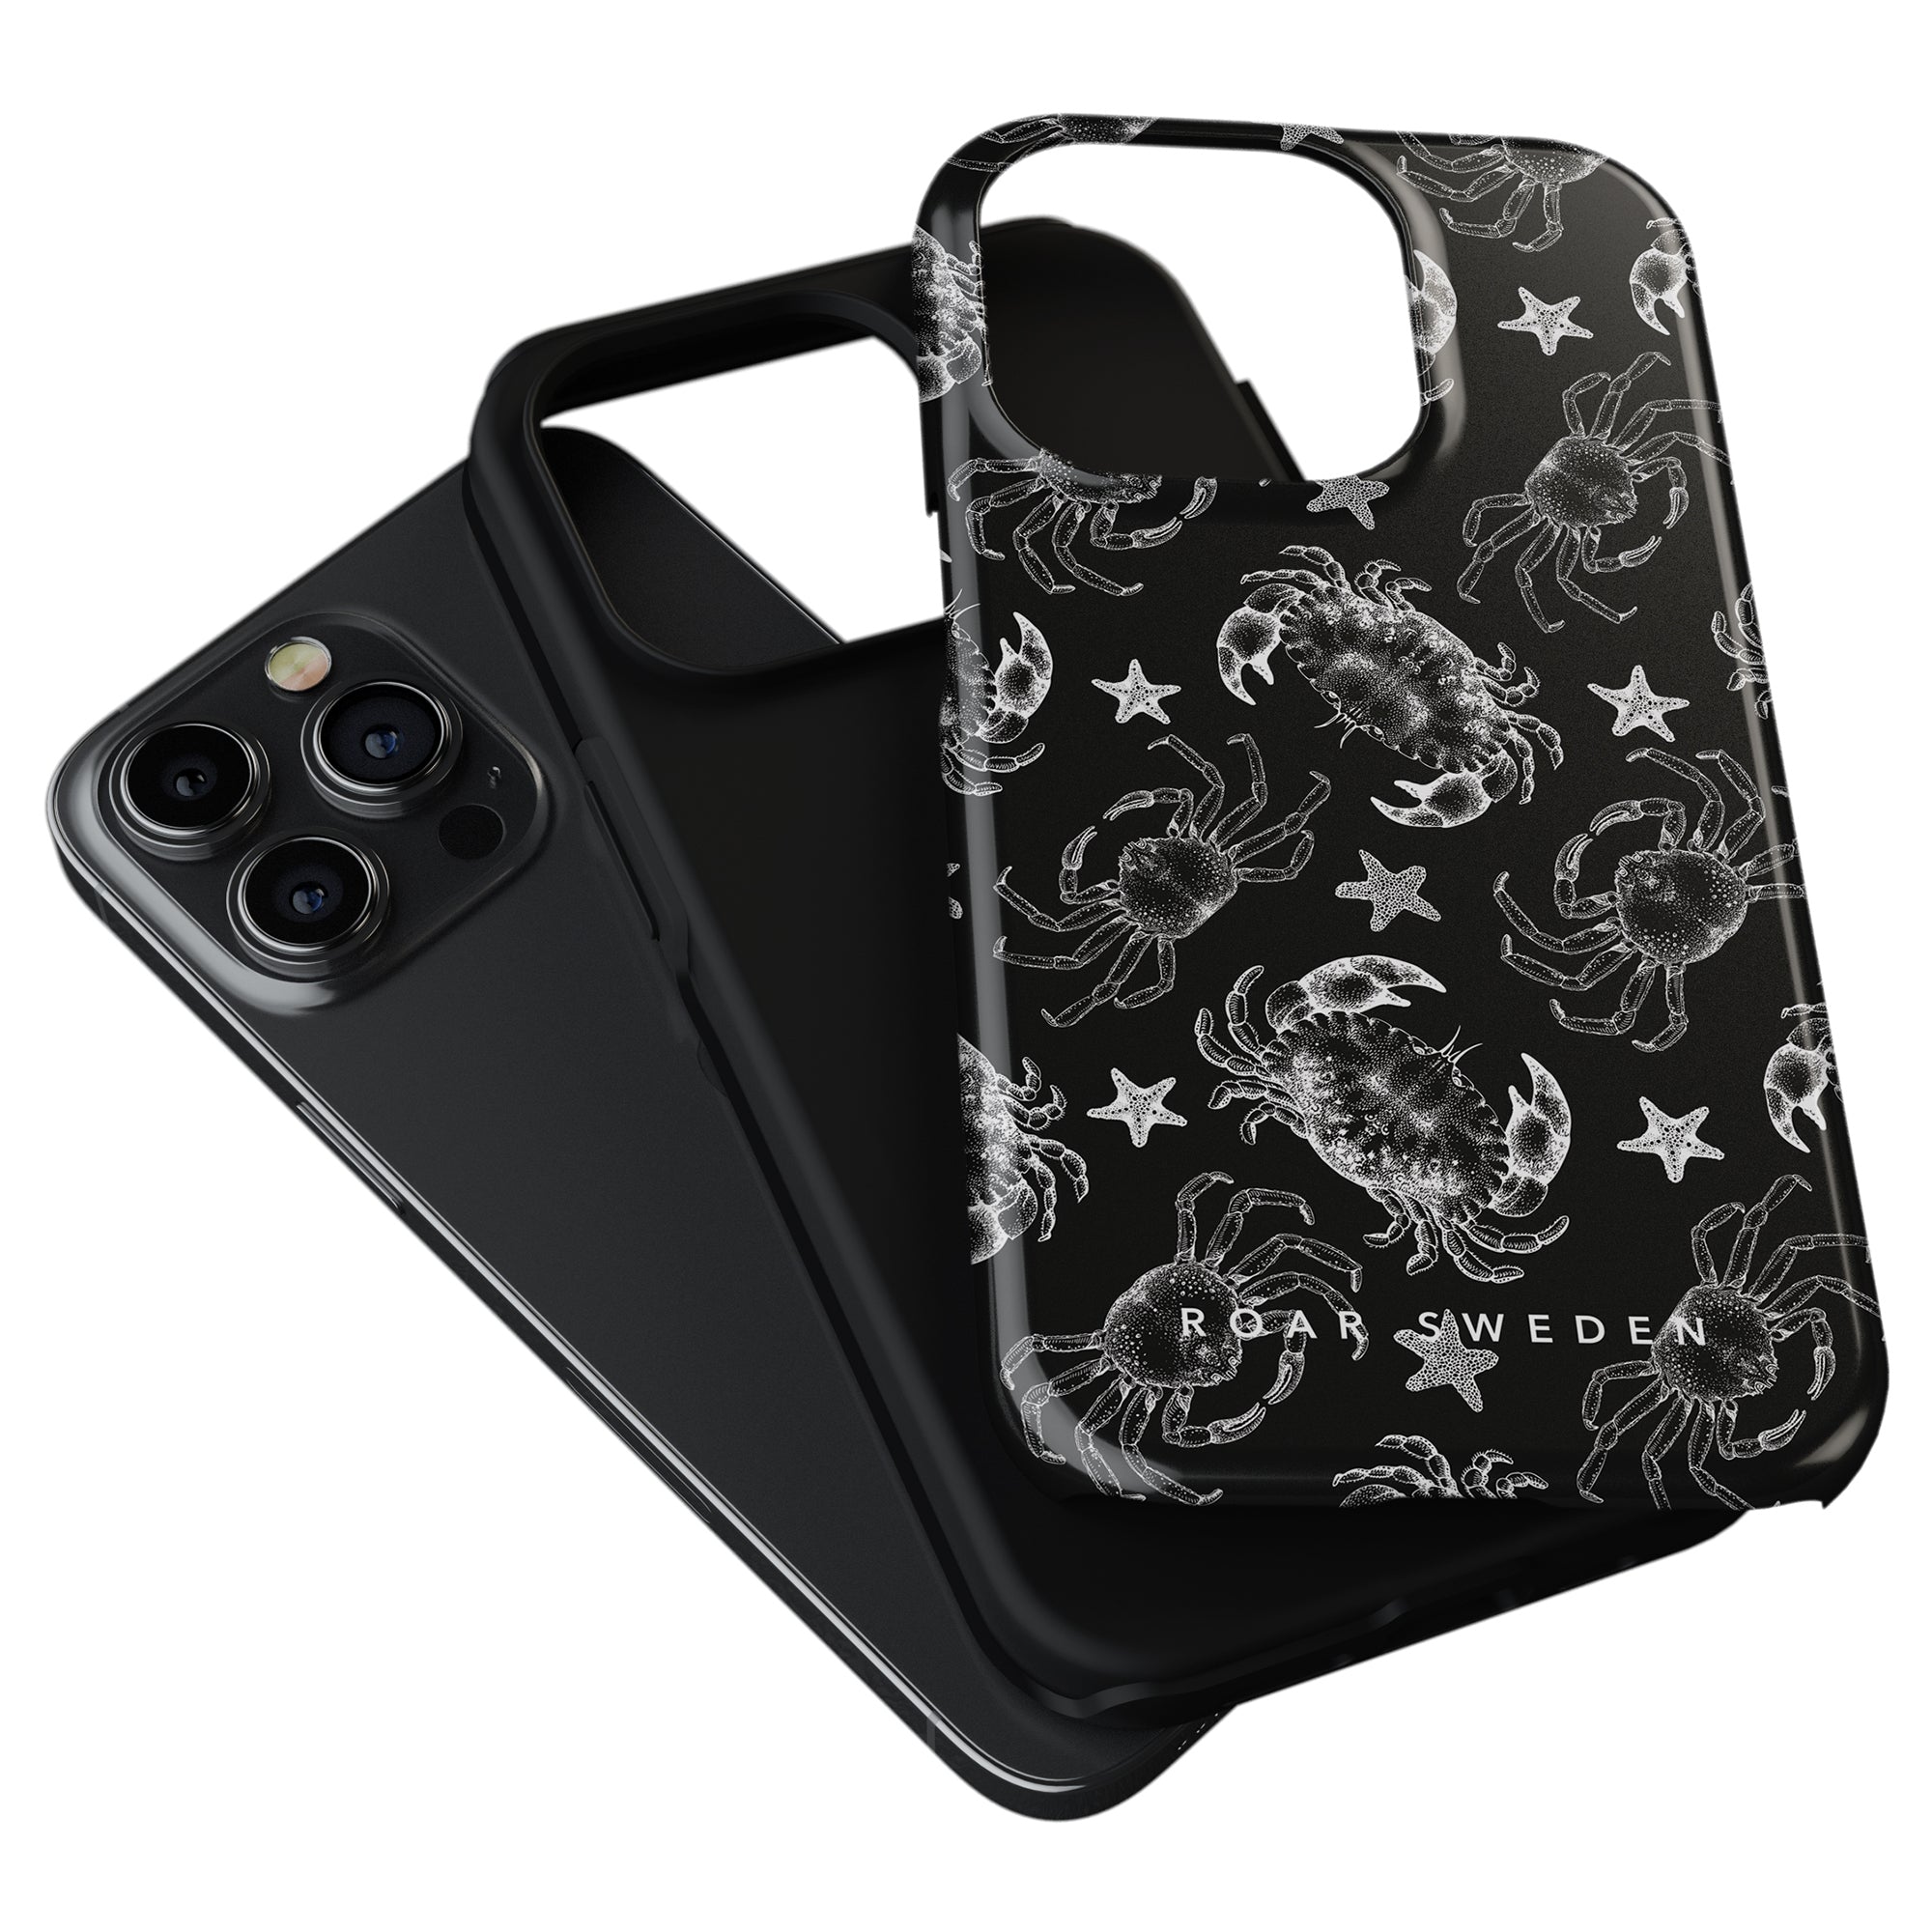 A Black Crab - Tough Case with a white crab and starfish design, from the Ocean Collection, is shown leaning against a plain black smartphone case.